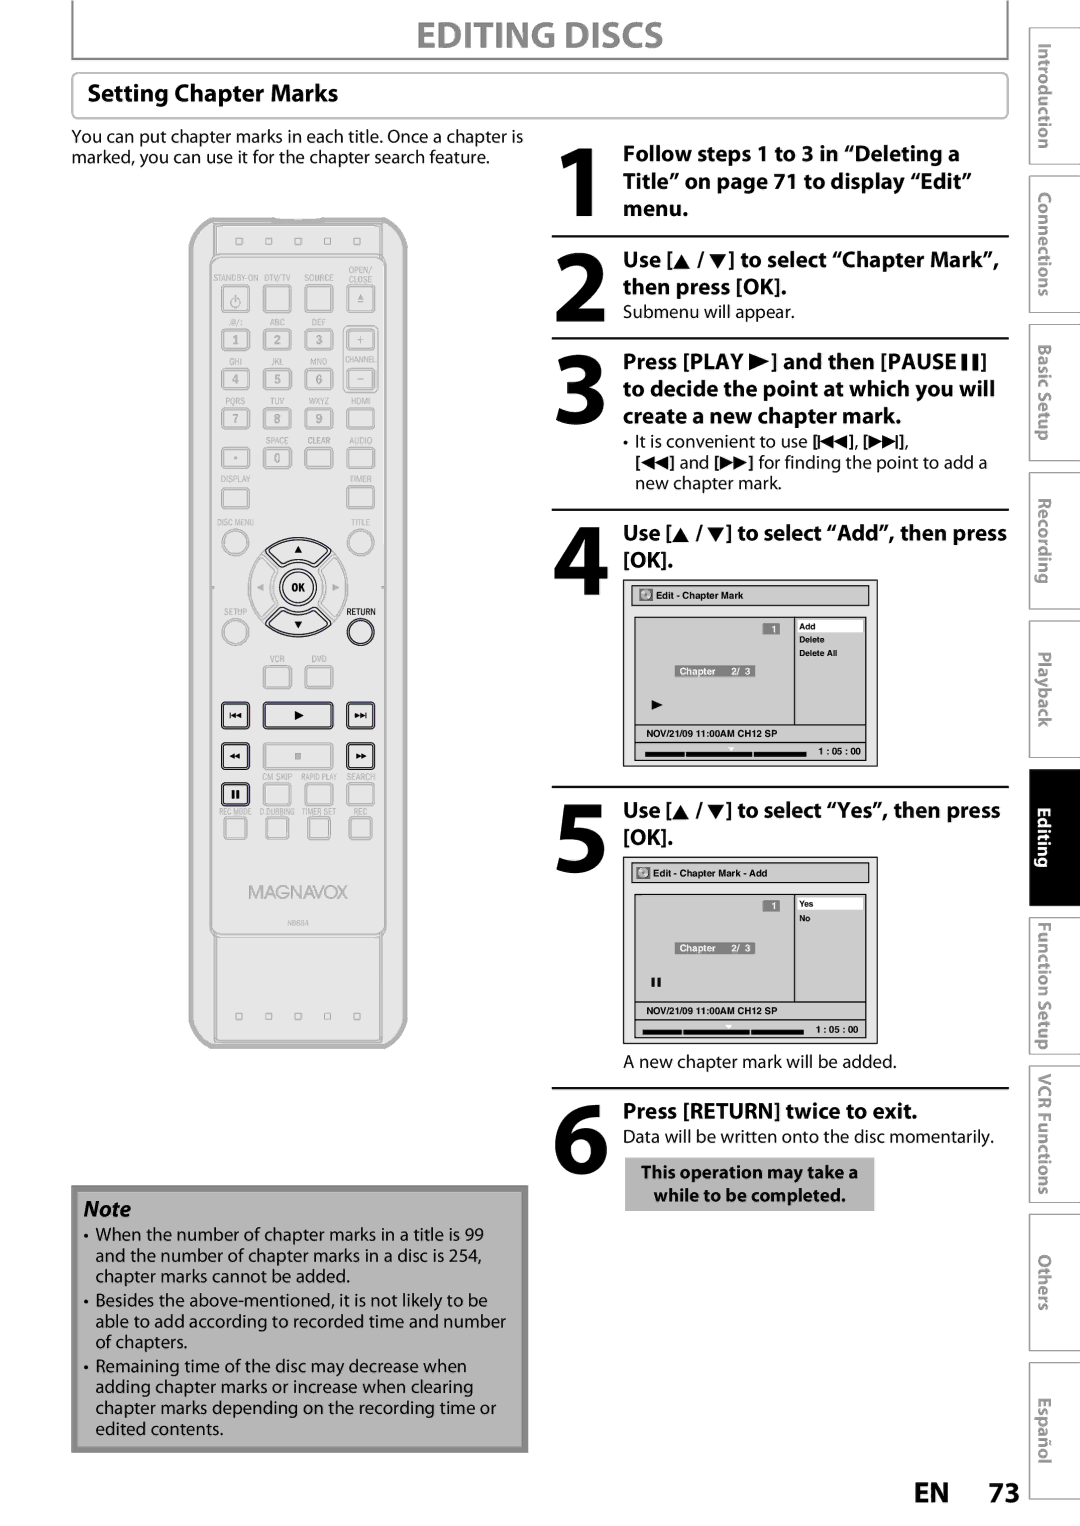 Magnavox 1VMN26713A owner manual Setting Chapter Marks, Use K/ L to select Add, then press OK, Submenu will appear 